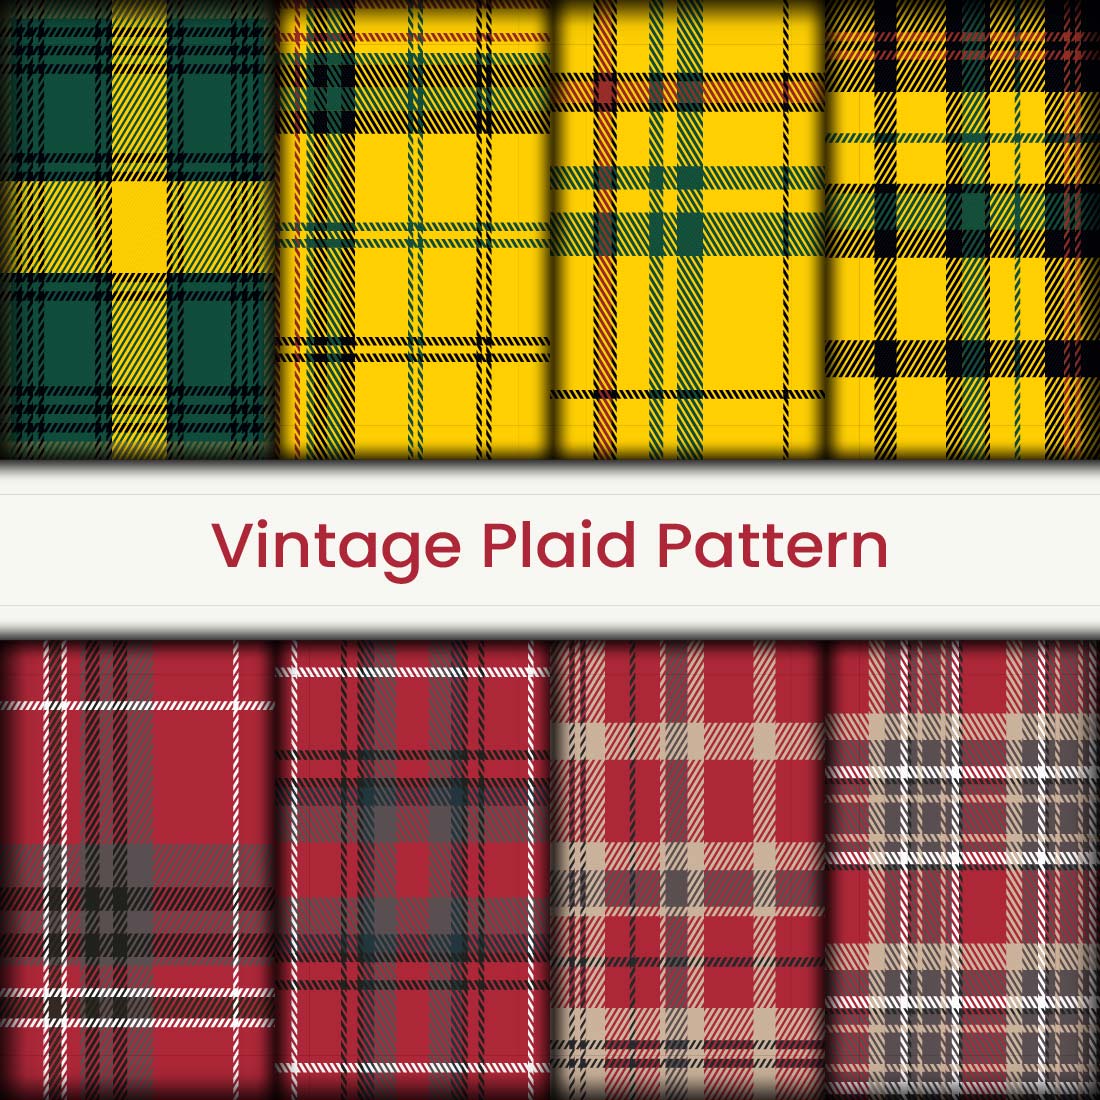 Fabric texture seamless pattern bundles in yellow, pink, green, red, brown and black vector illustration Only $ 8 pinterest preview image.